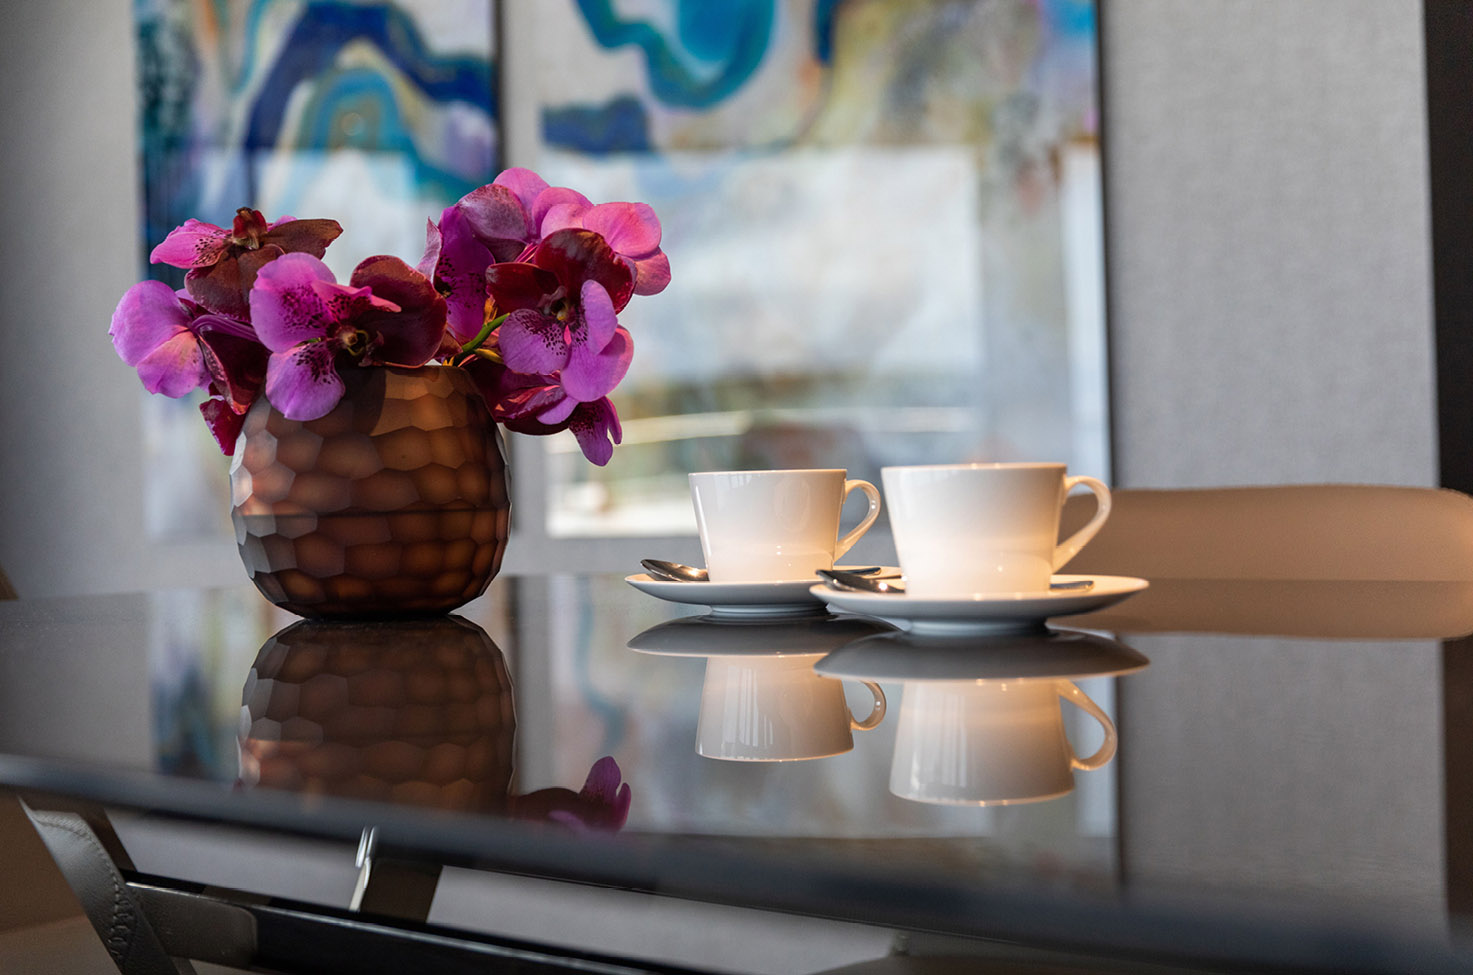 table with flowers, coffee cups and artwork in the background